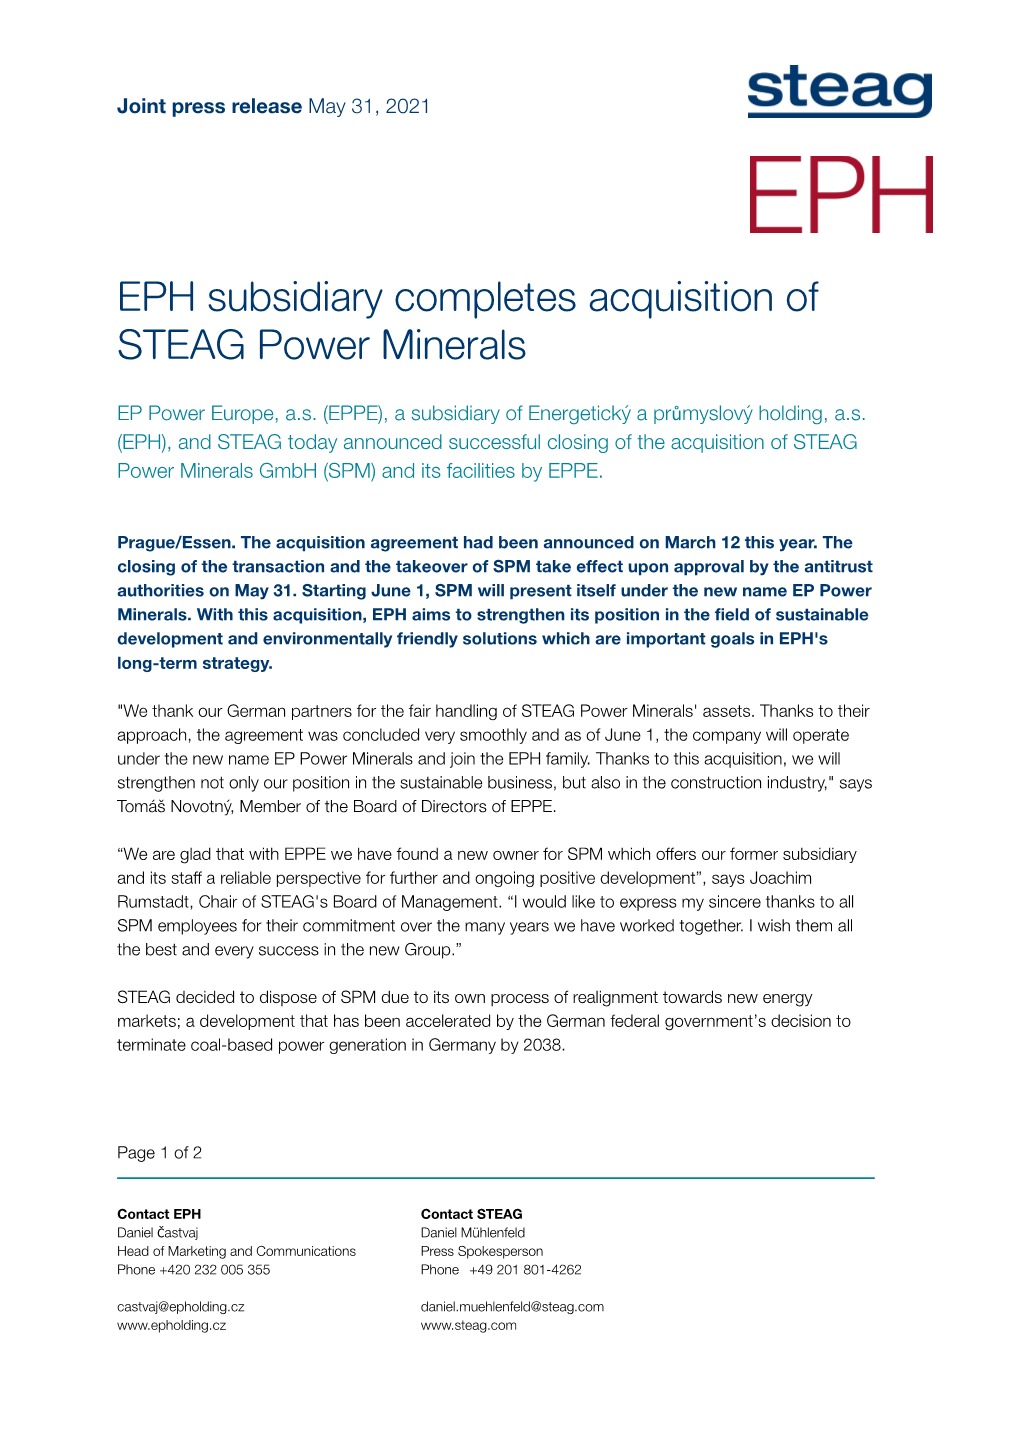 EPH Subsidiary Completes Acquisition of STEAG Power Minerals